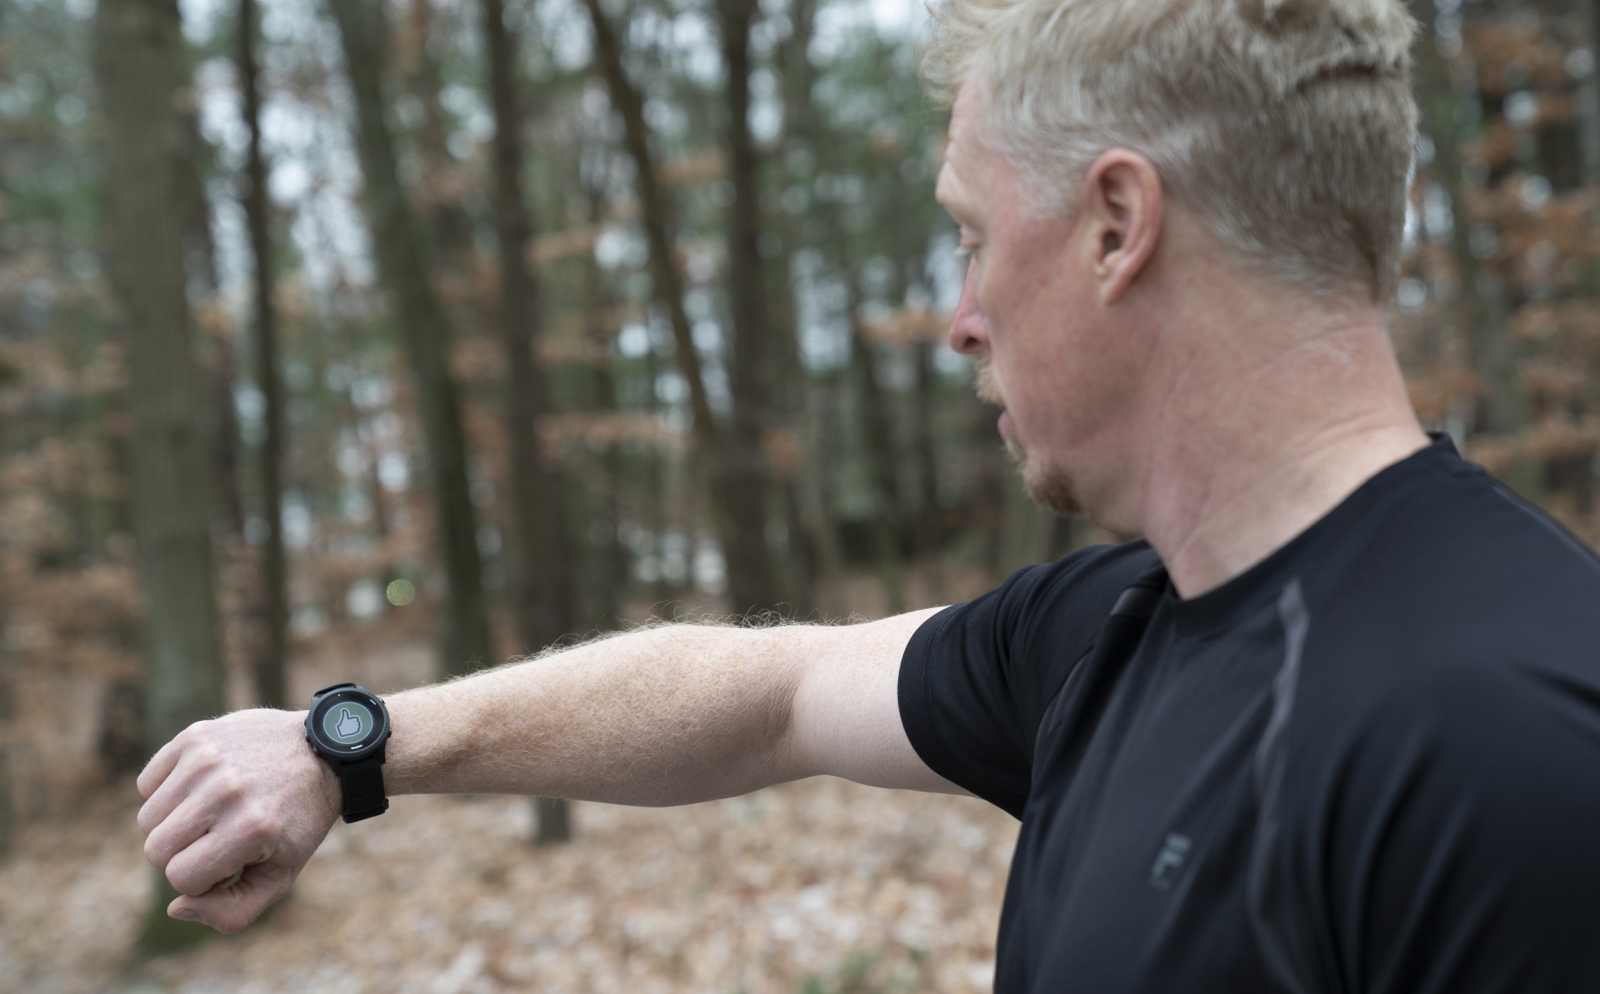 A man in black t-shirt looks at a smartwatch on his wrist, which is displaying a green circle with a thumbs up sign. The man is outside, with trees and leaves in the background.